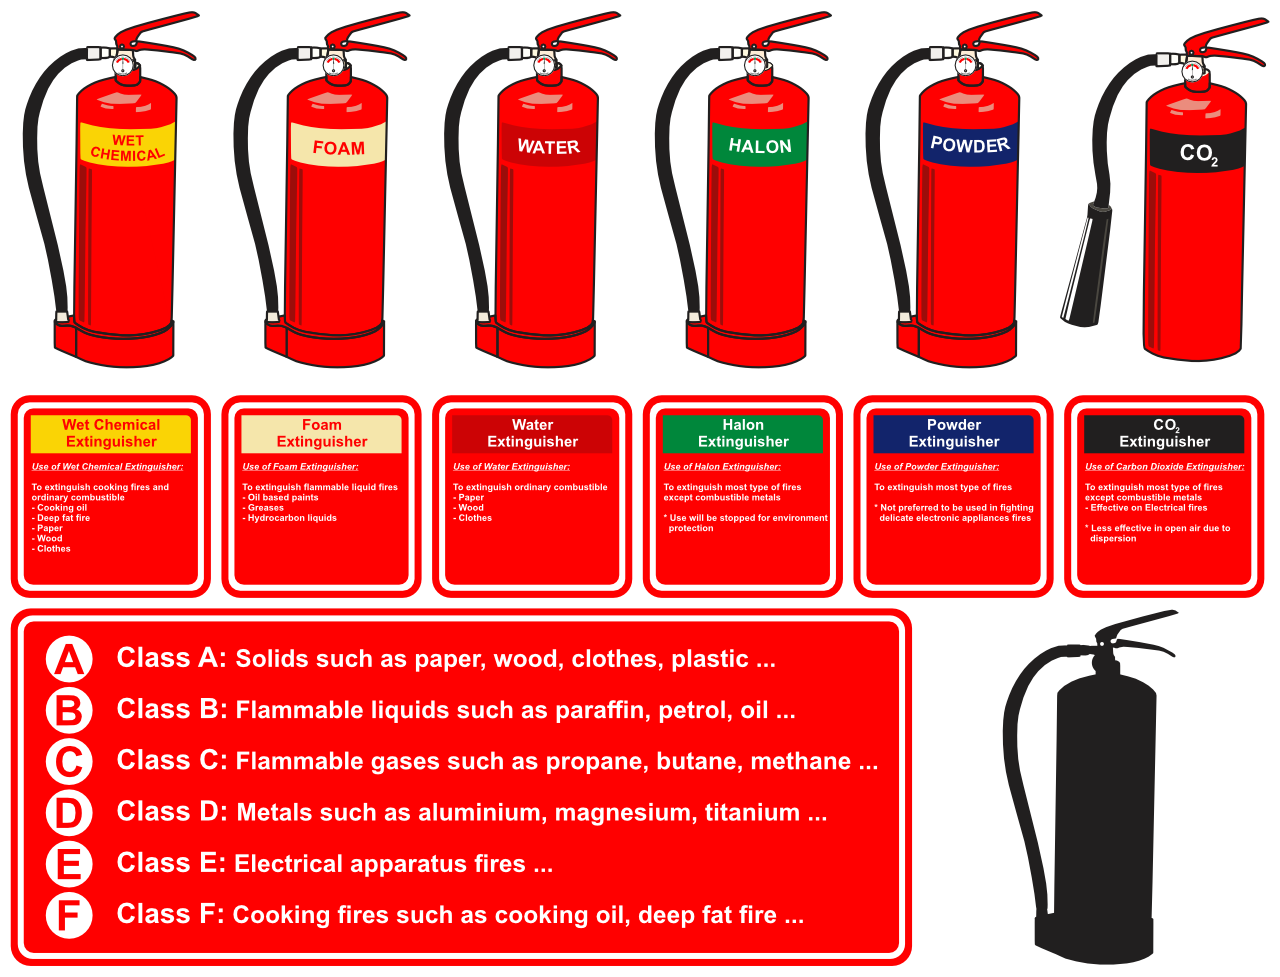 PASS fire extinguisher - types and classes of fire extinguisher